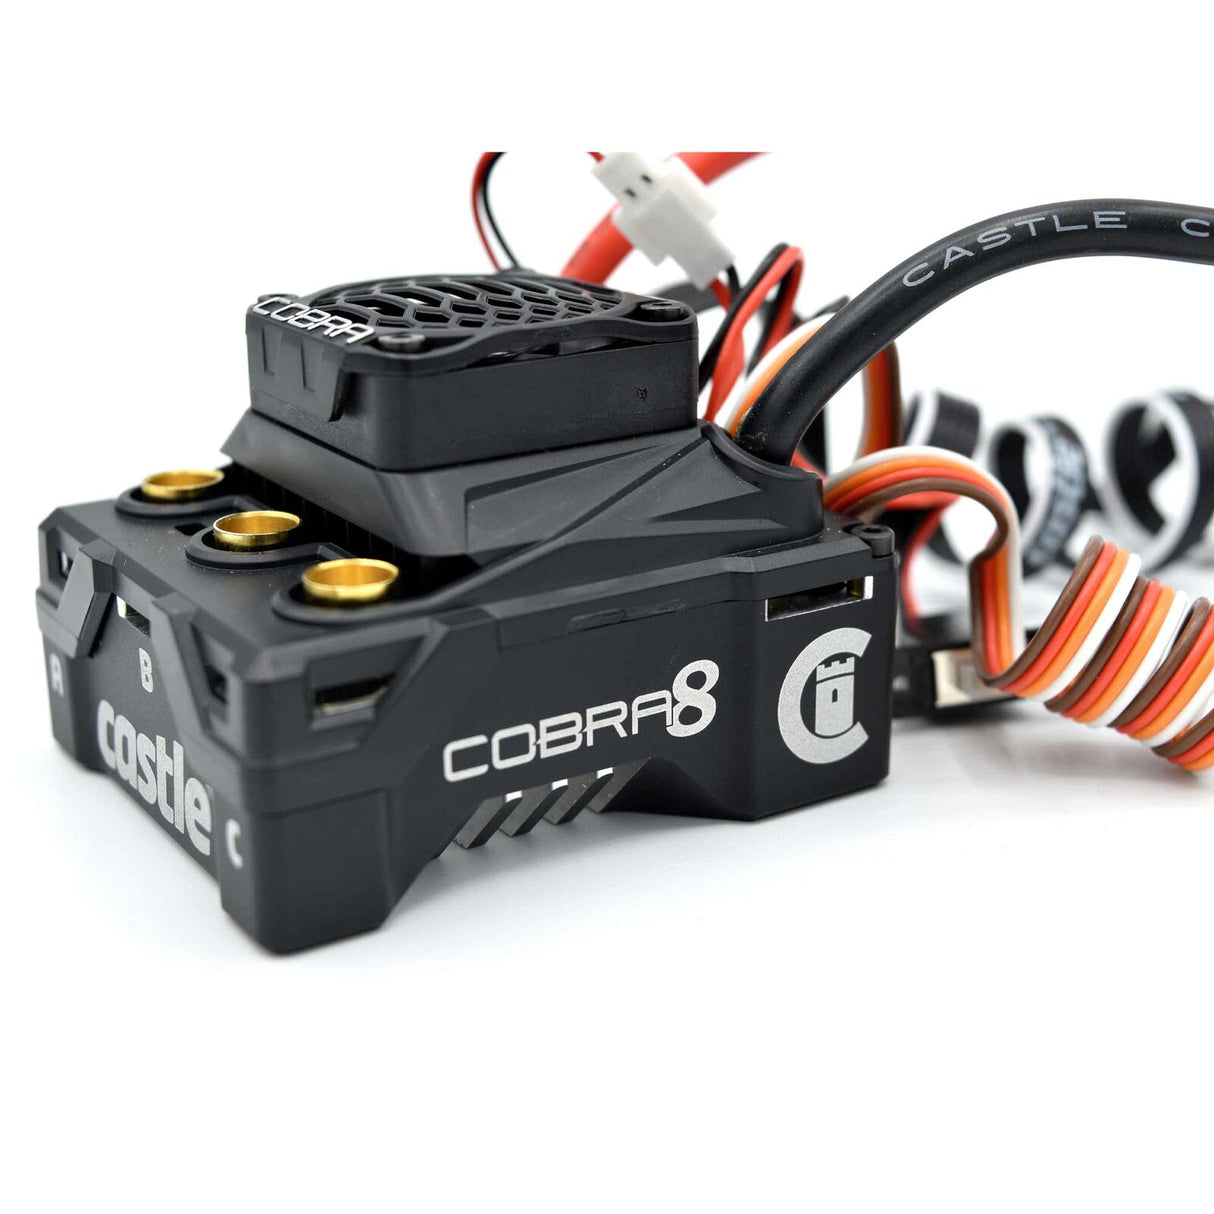 CASTLE Creations 010-0170-00 COBRA 8 25.5V Electronic Speed Control